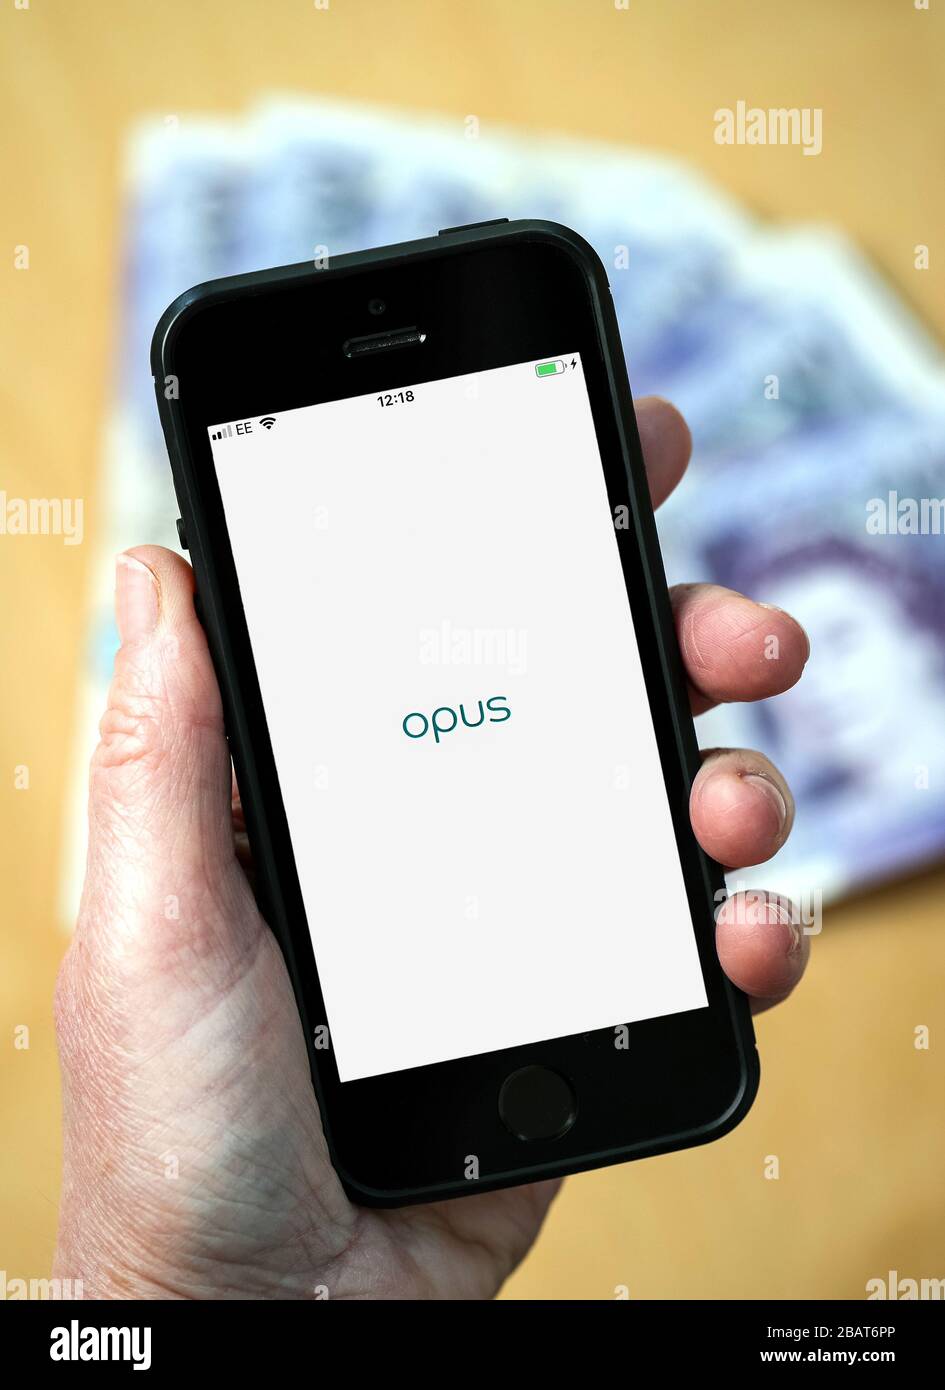 A woman using the Opus credit card app on a mobile phone. (Editorial Use Only) Stock Photo